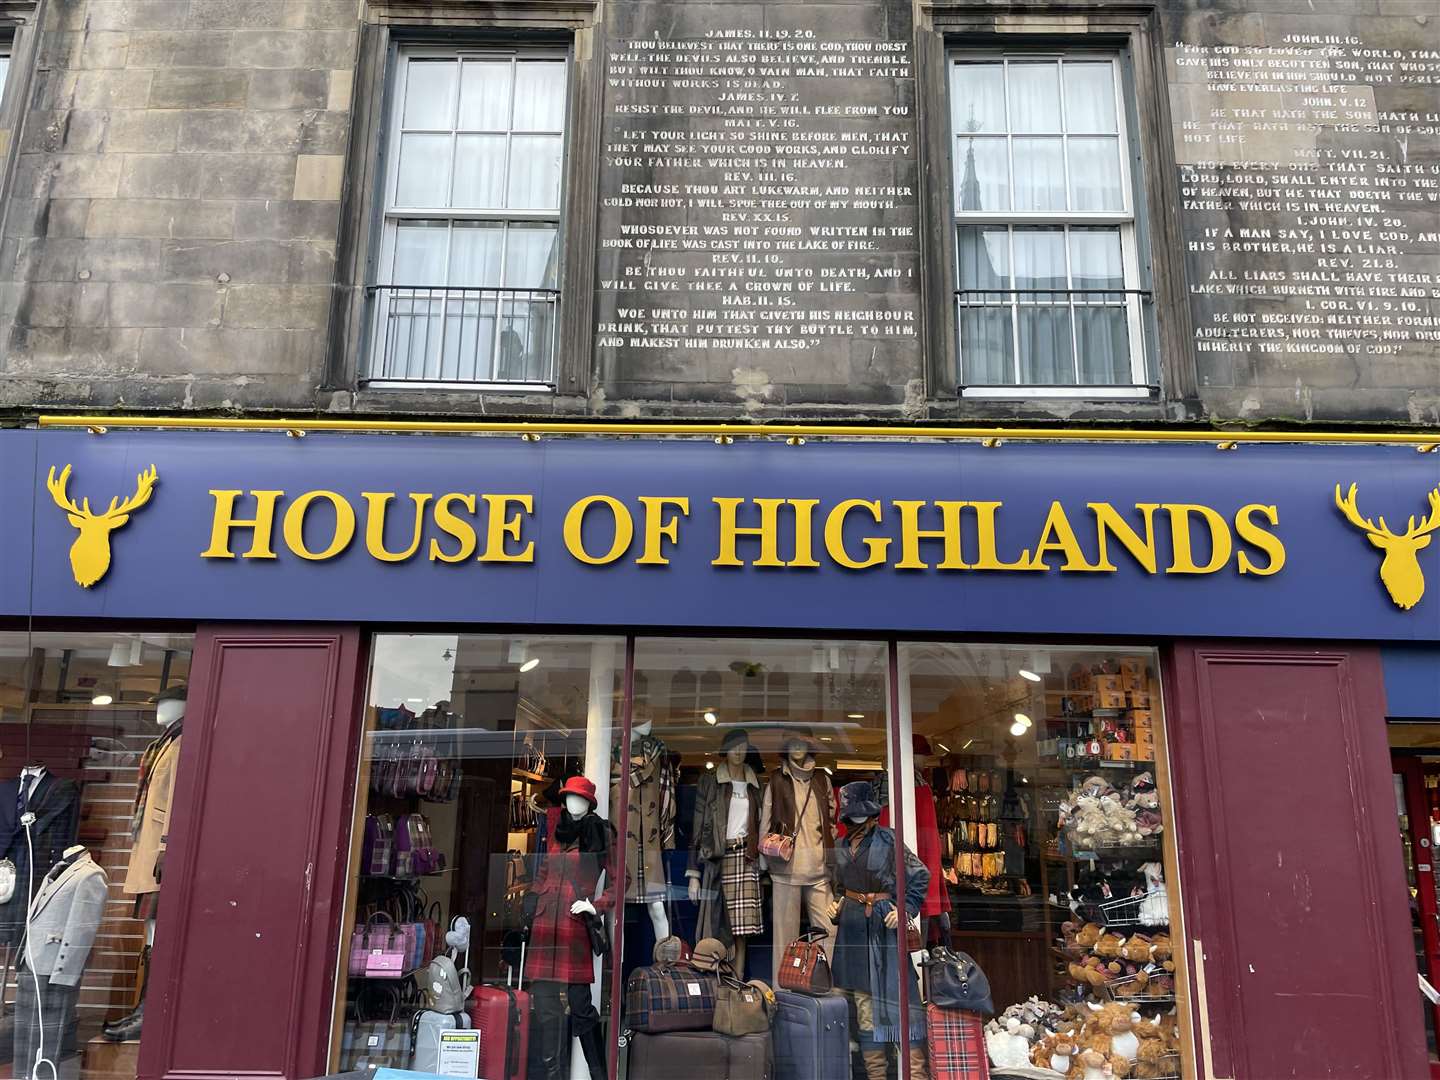 The completed House of Highlands signage.